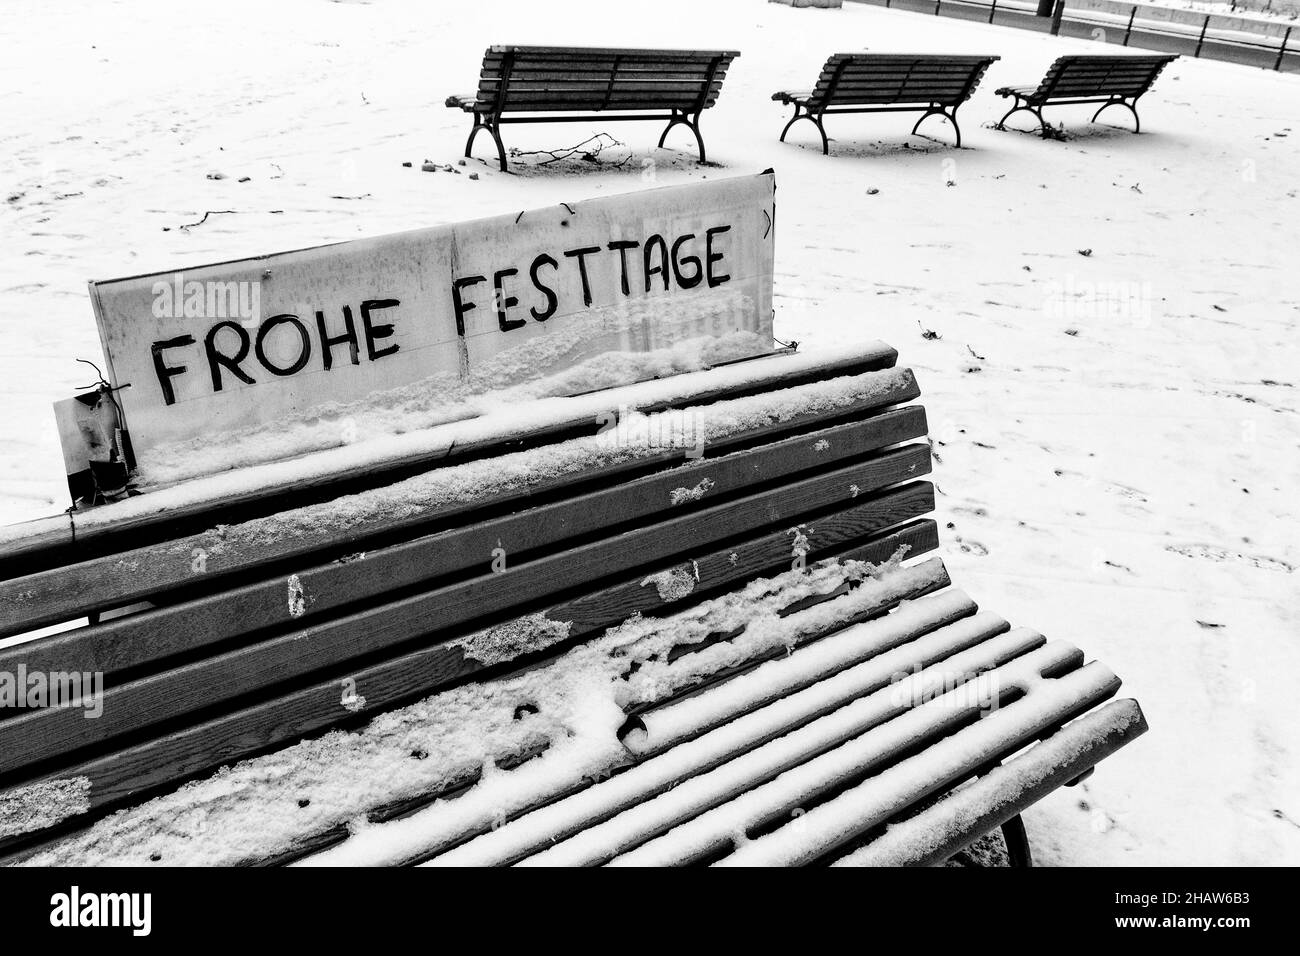 Desolate, snowy wooden bench with Christmas motto, Berlin, Germany Stock Photo